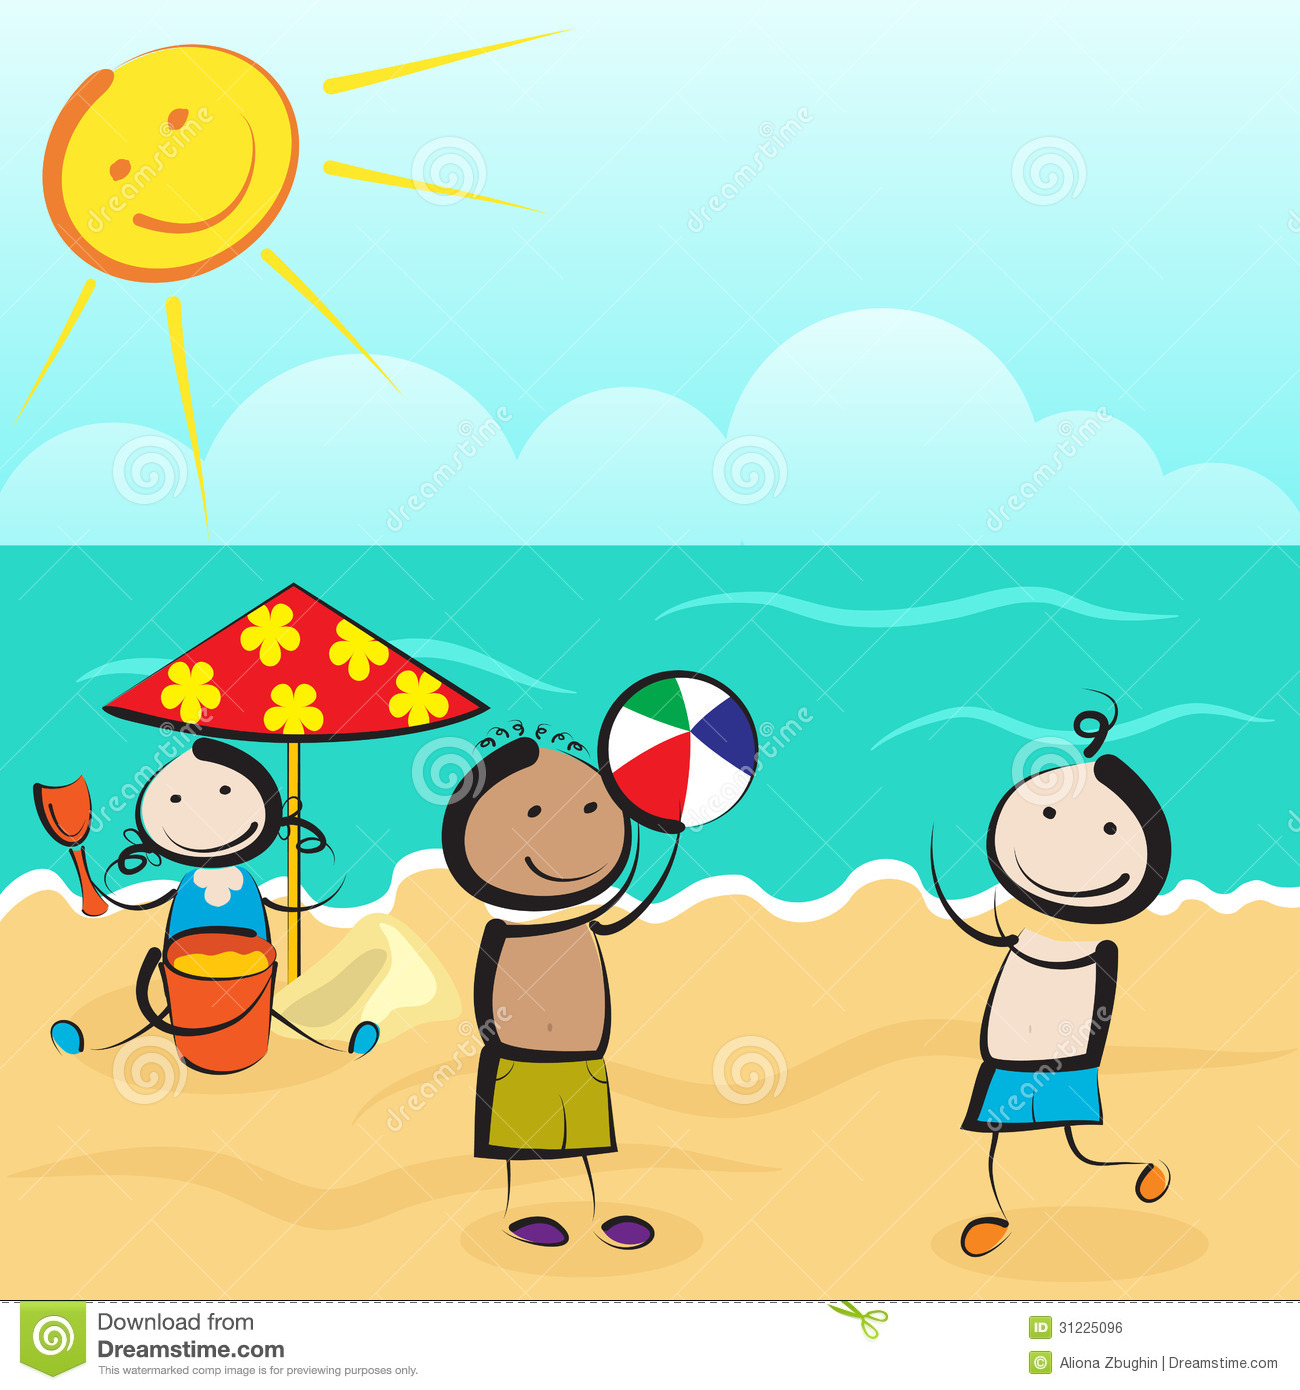 Children Playing On Beach Royalty Free Stock Image   Image  31225096